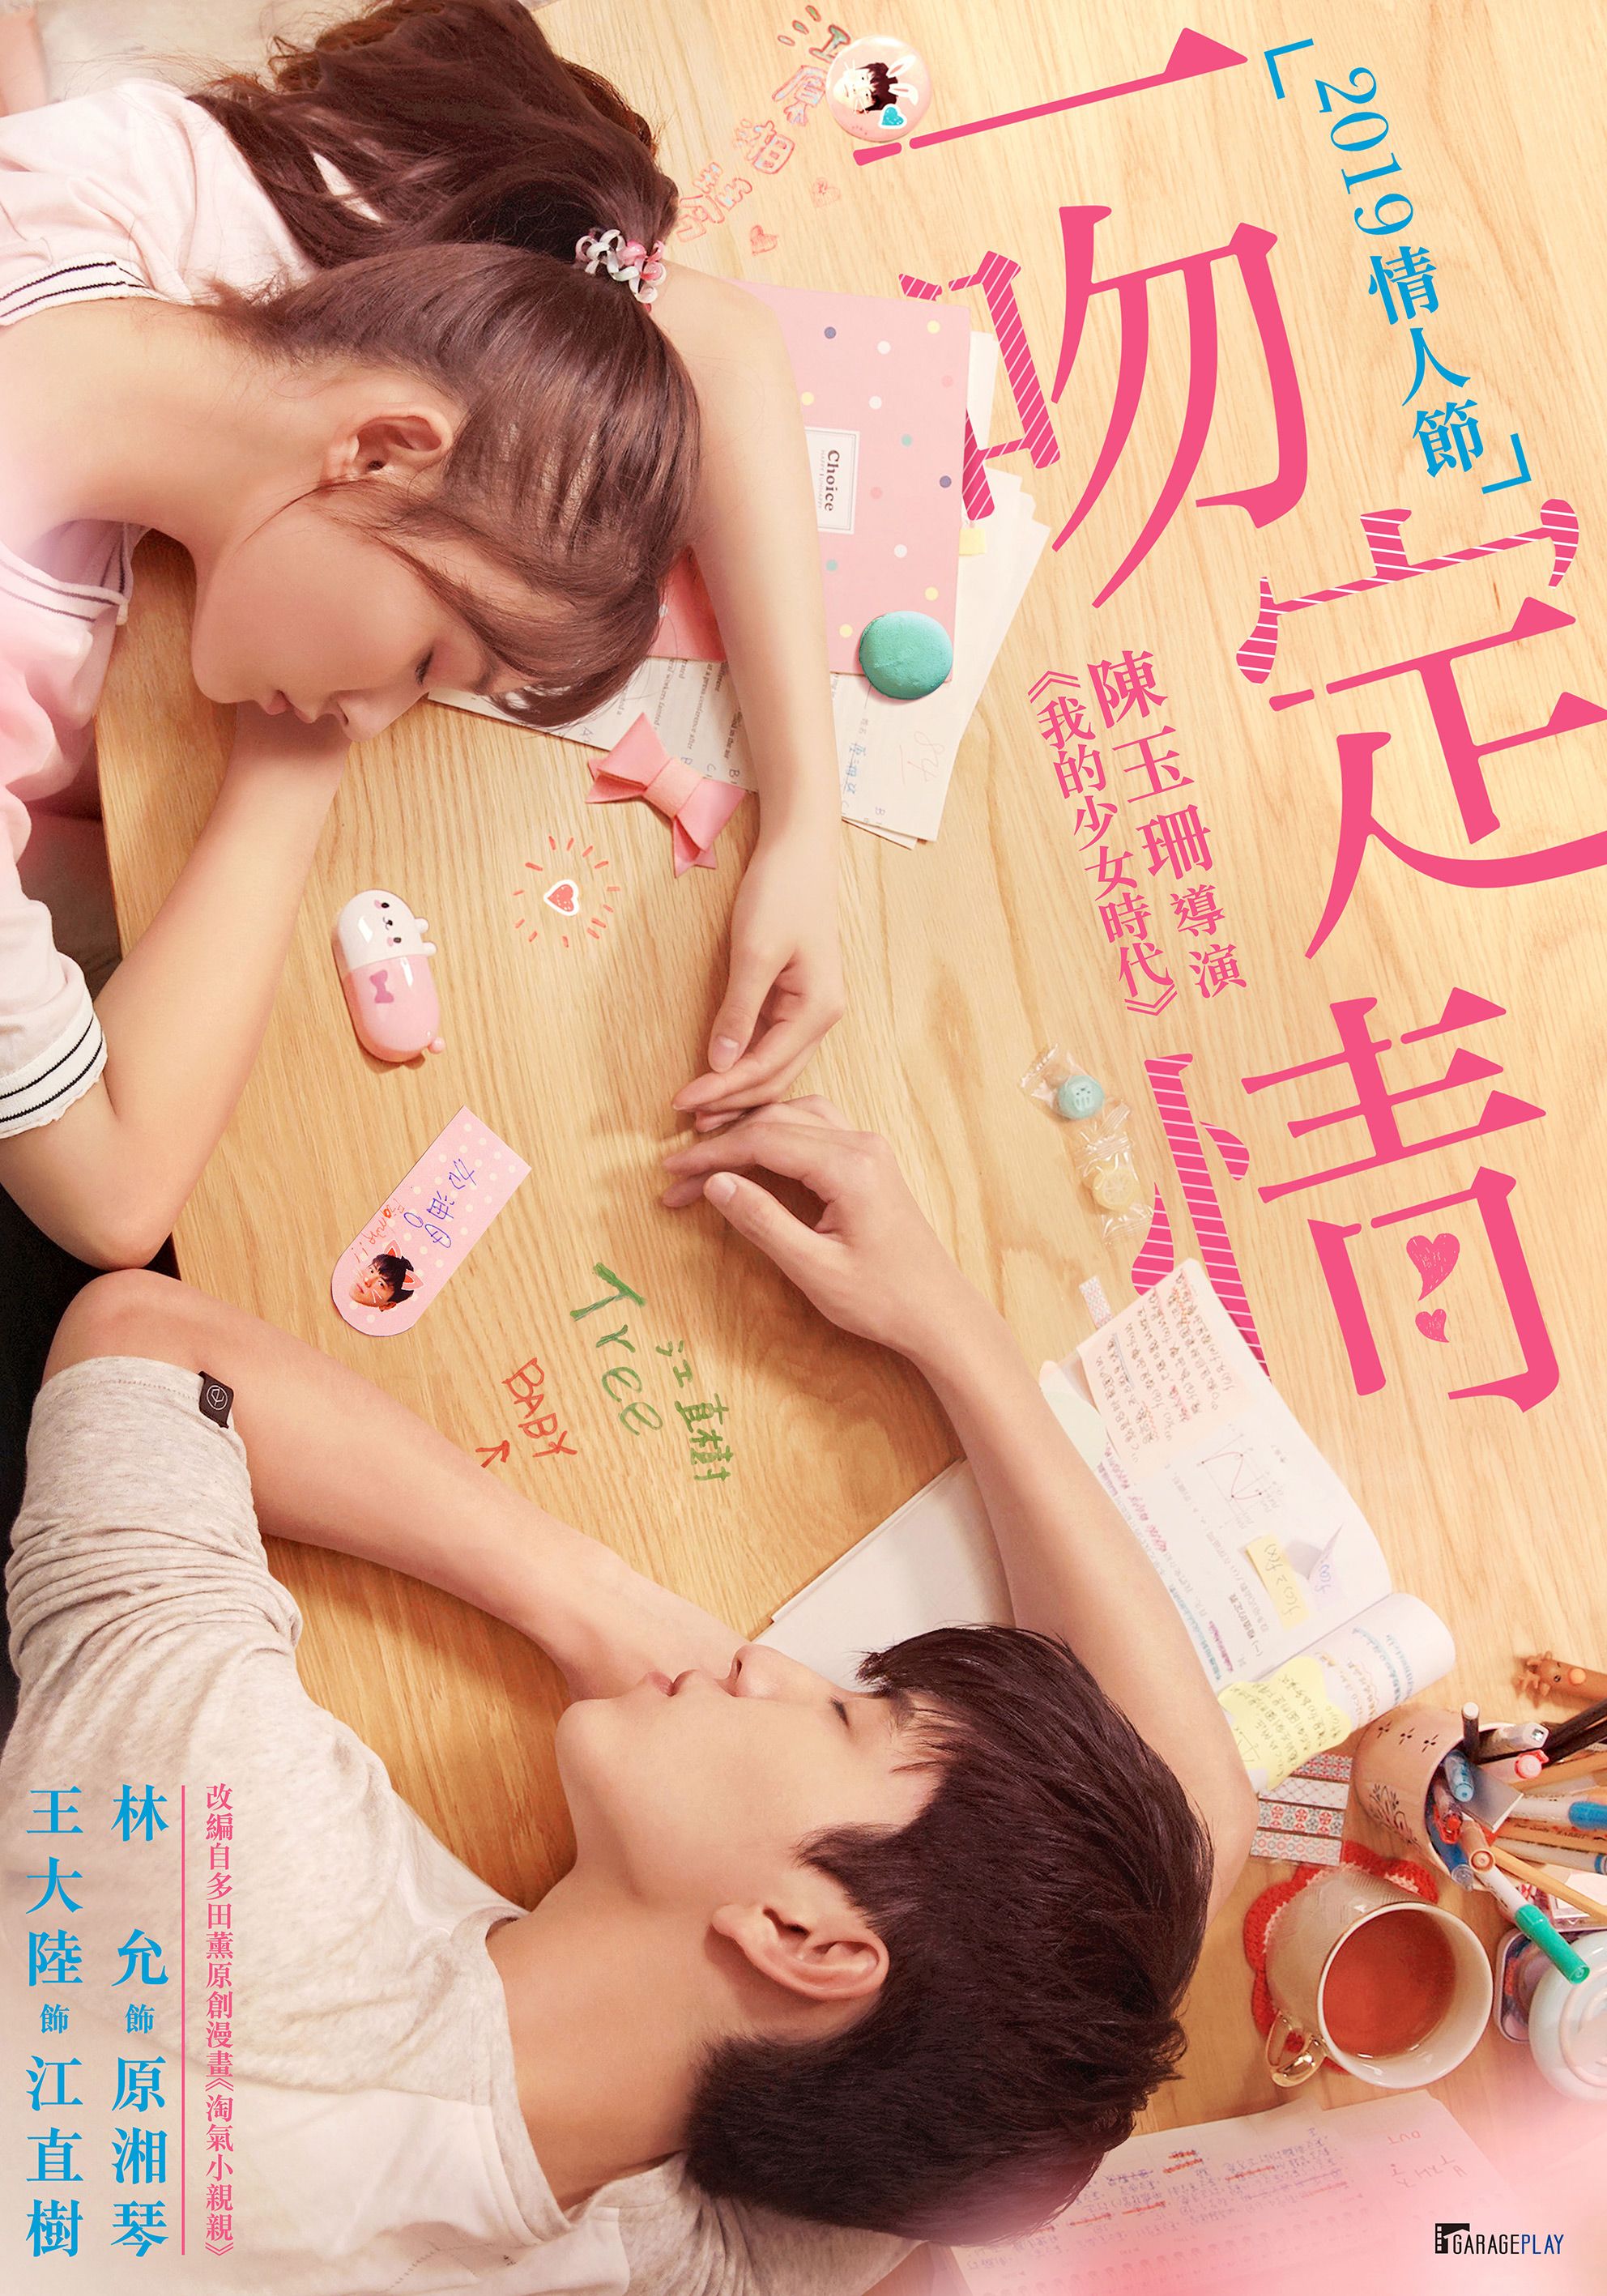 Fall In Love At First Kiss Main Poster